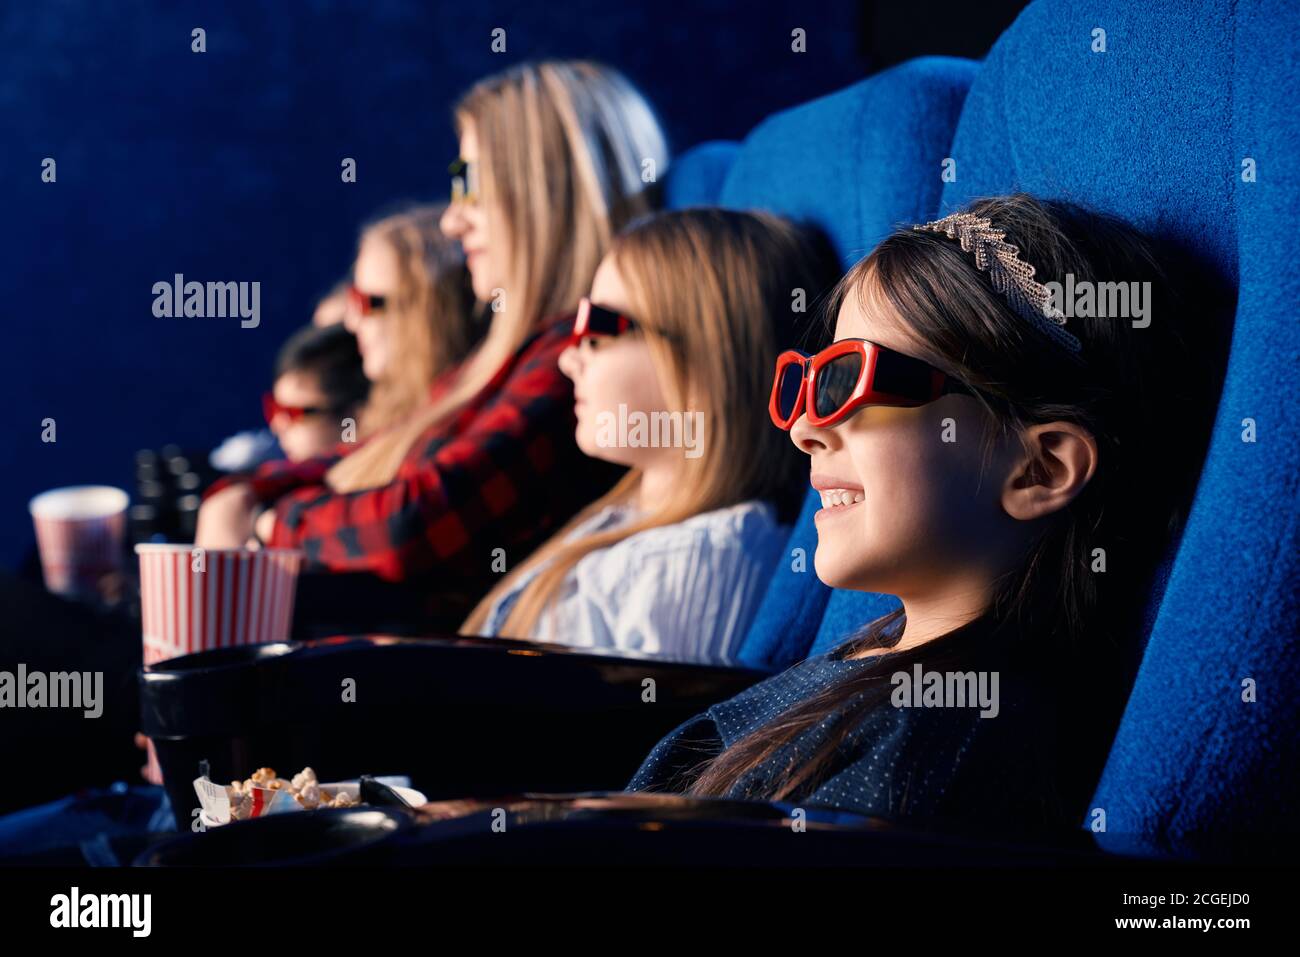 Selective focus of laughing child wearing 3d glasses, eating popcorn and watching funny movie. Cute little girl enjoying time with friends in cinema. Concept of leisure and entertainment. Stock Photo